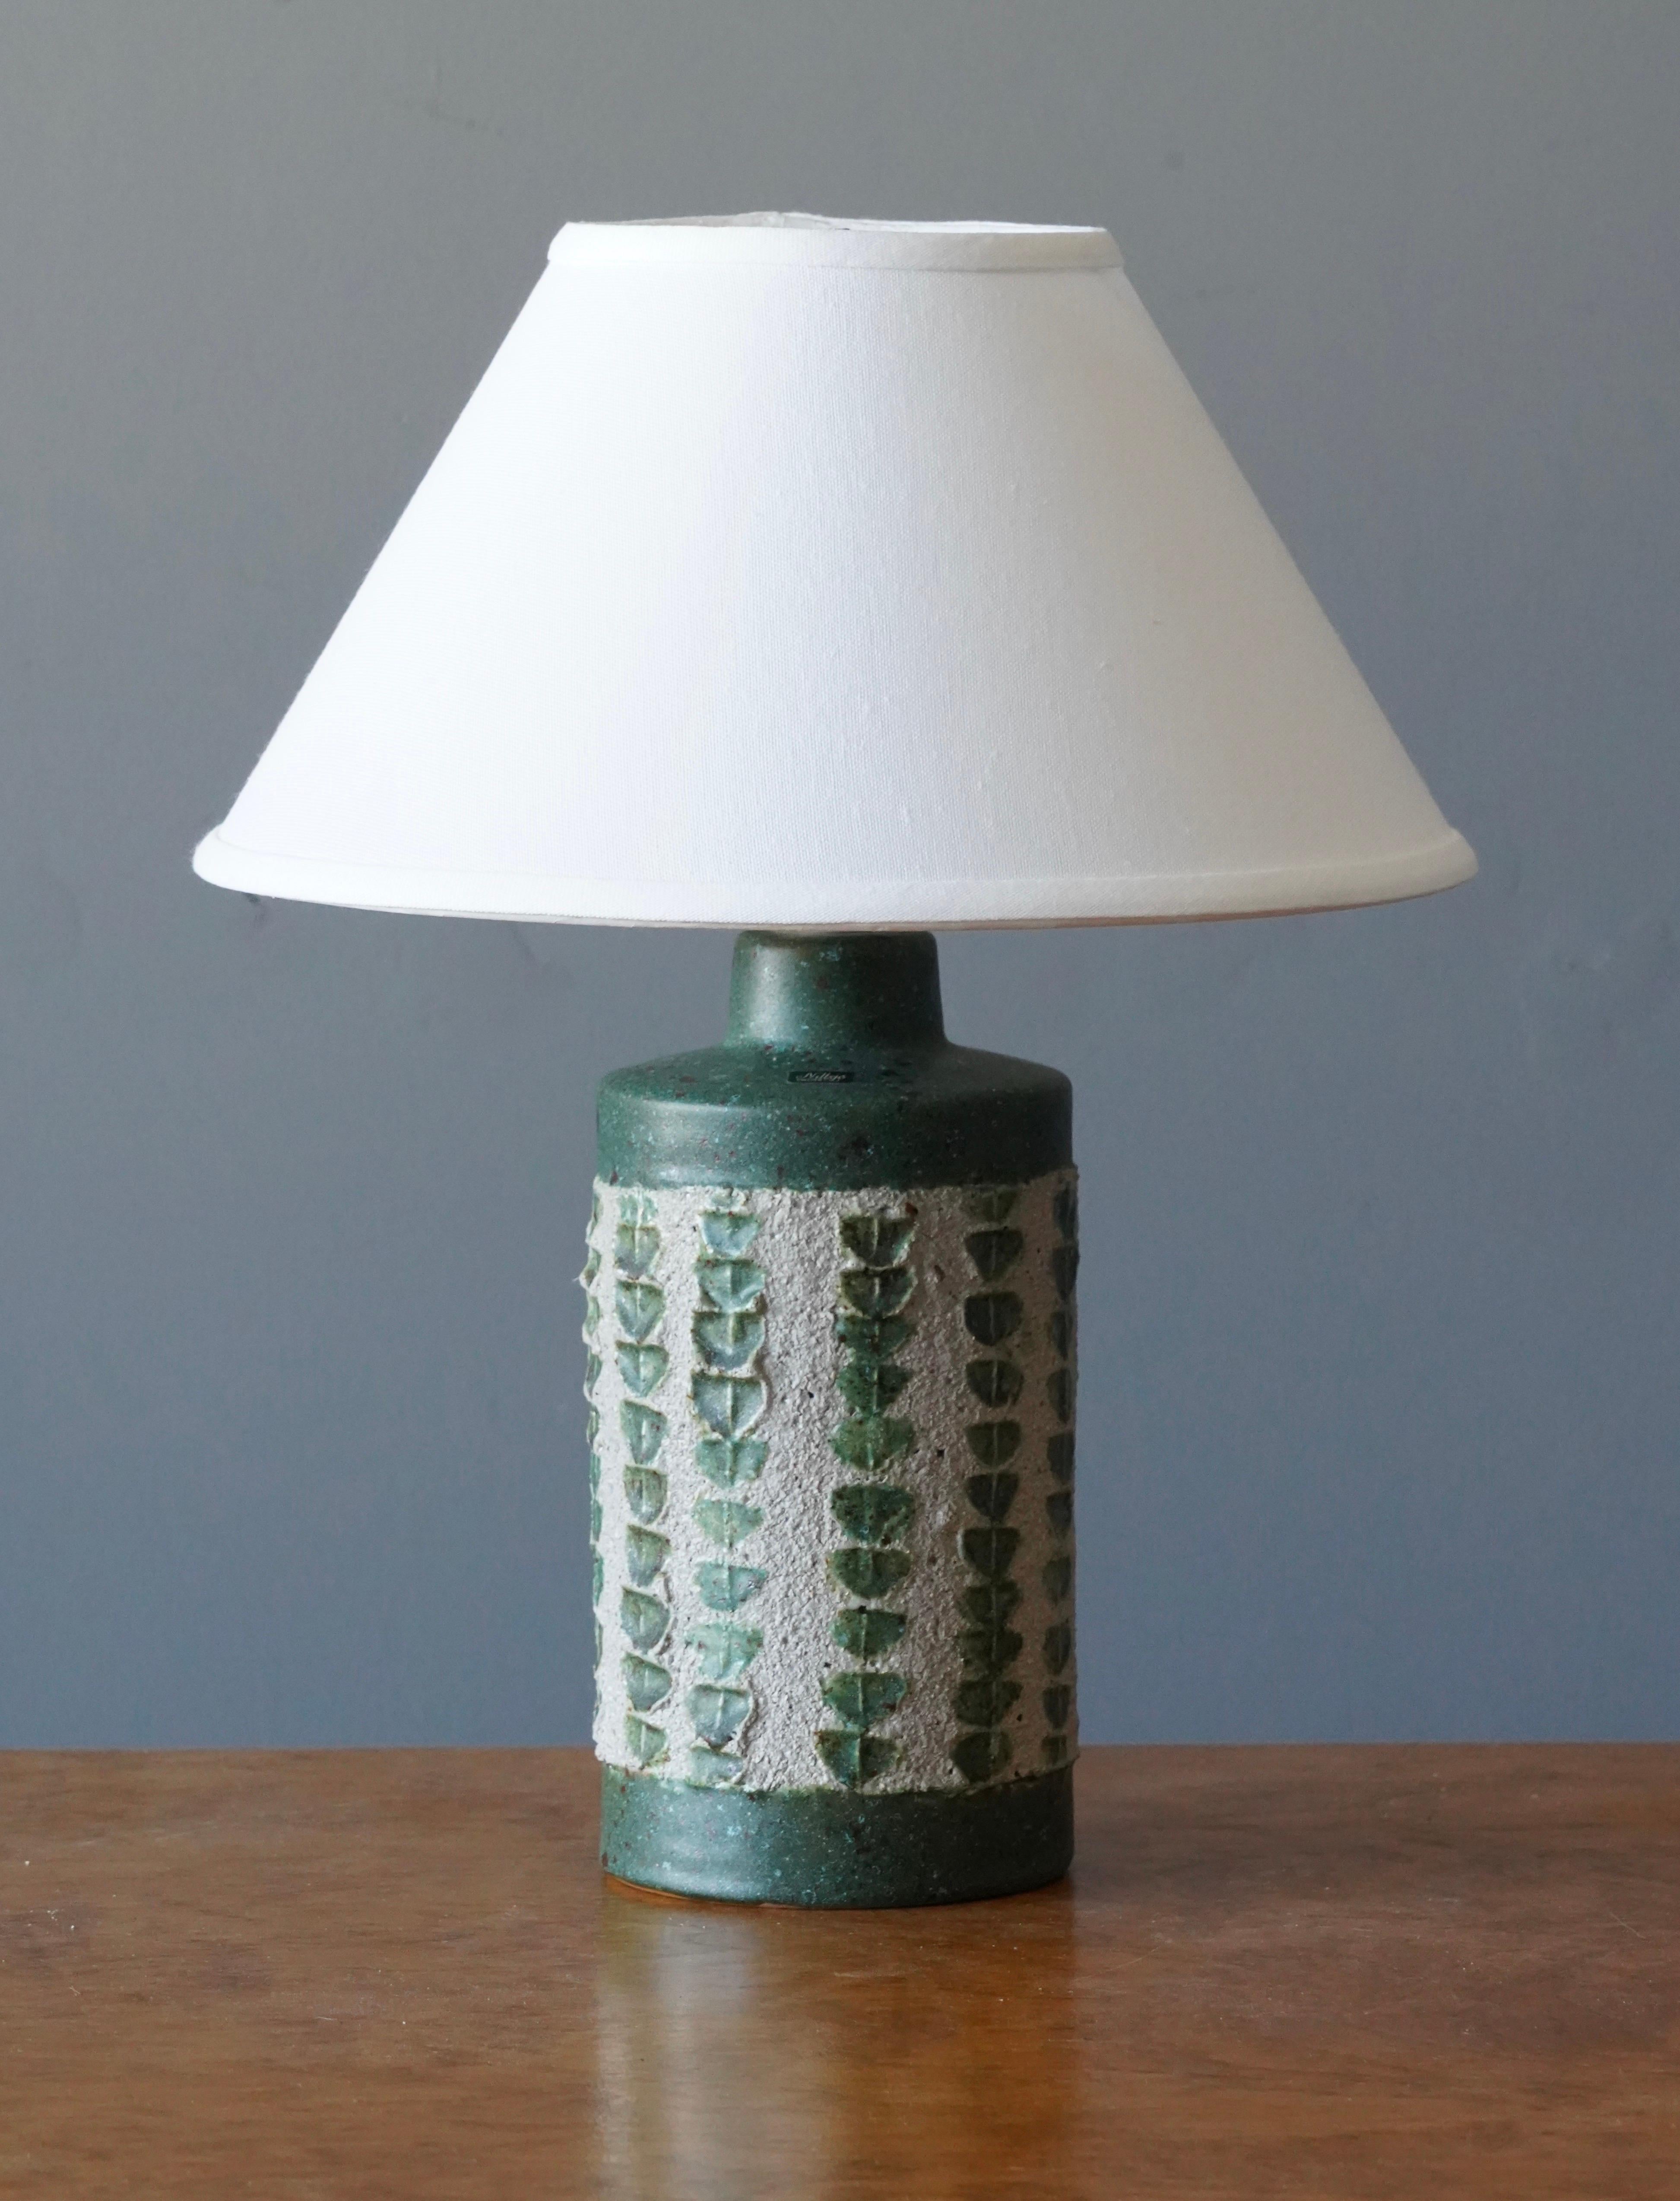 A table lamp designed by Thomas Hellström, produced by Nittsjö, Sweden, c. 1960s.

Features subtle incised decor and a incised details.

Sold without Lampshade. 

Measurement with shade: 16